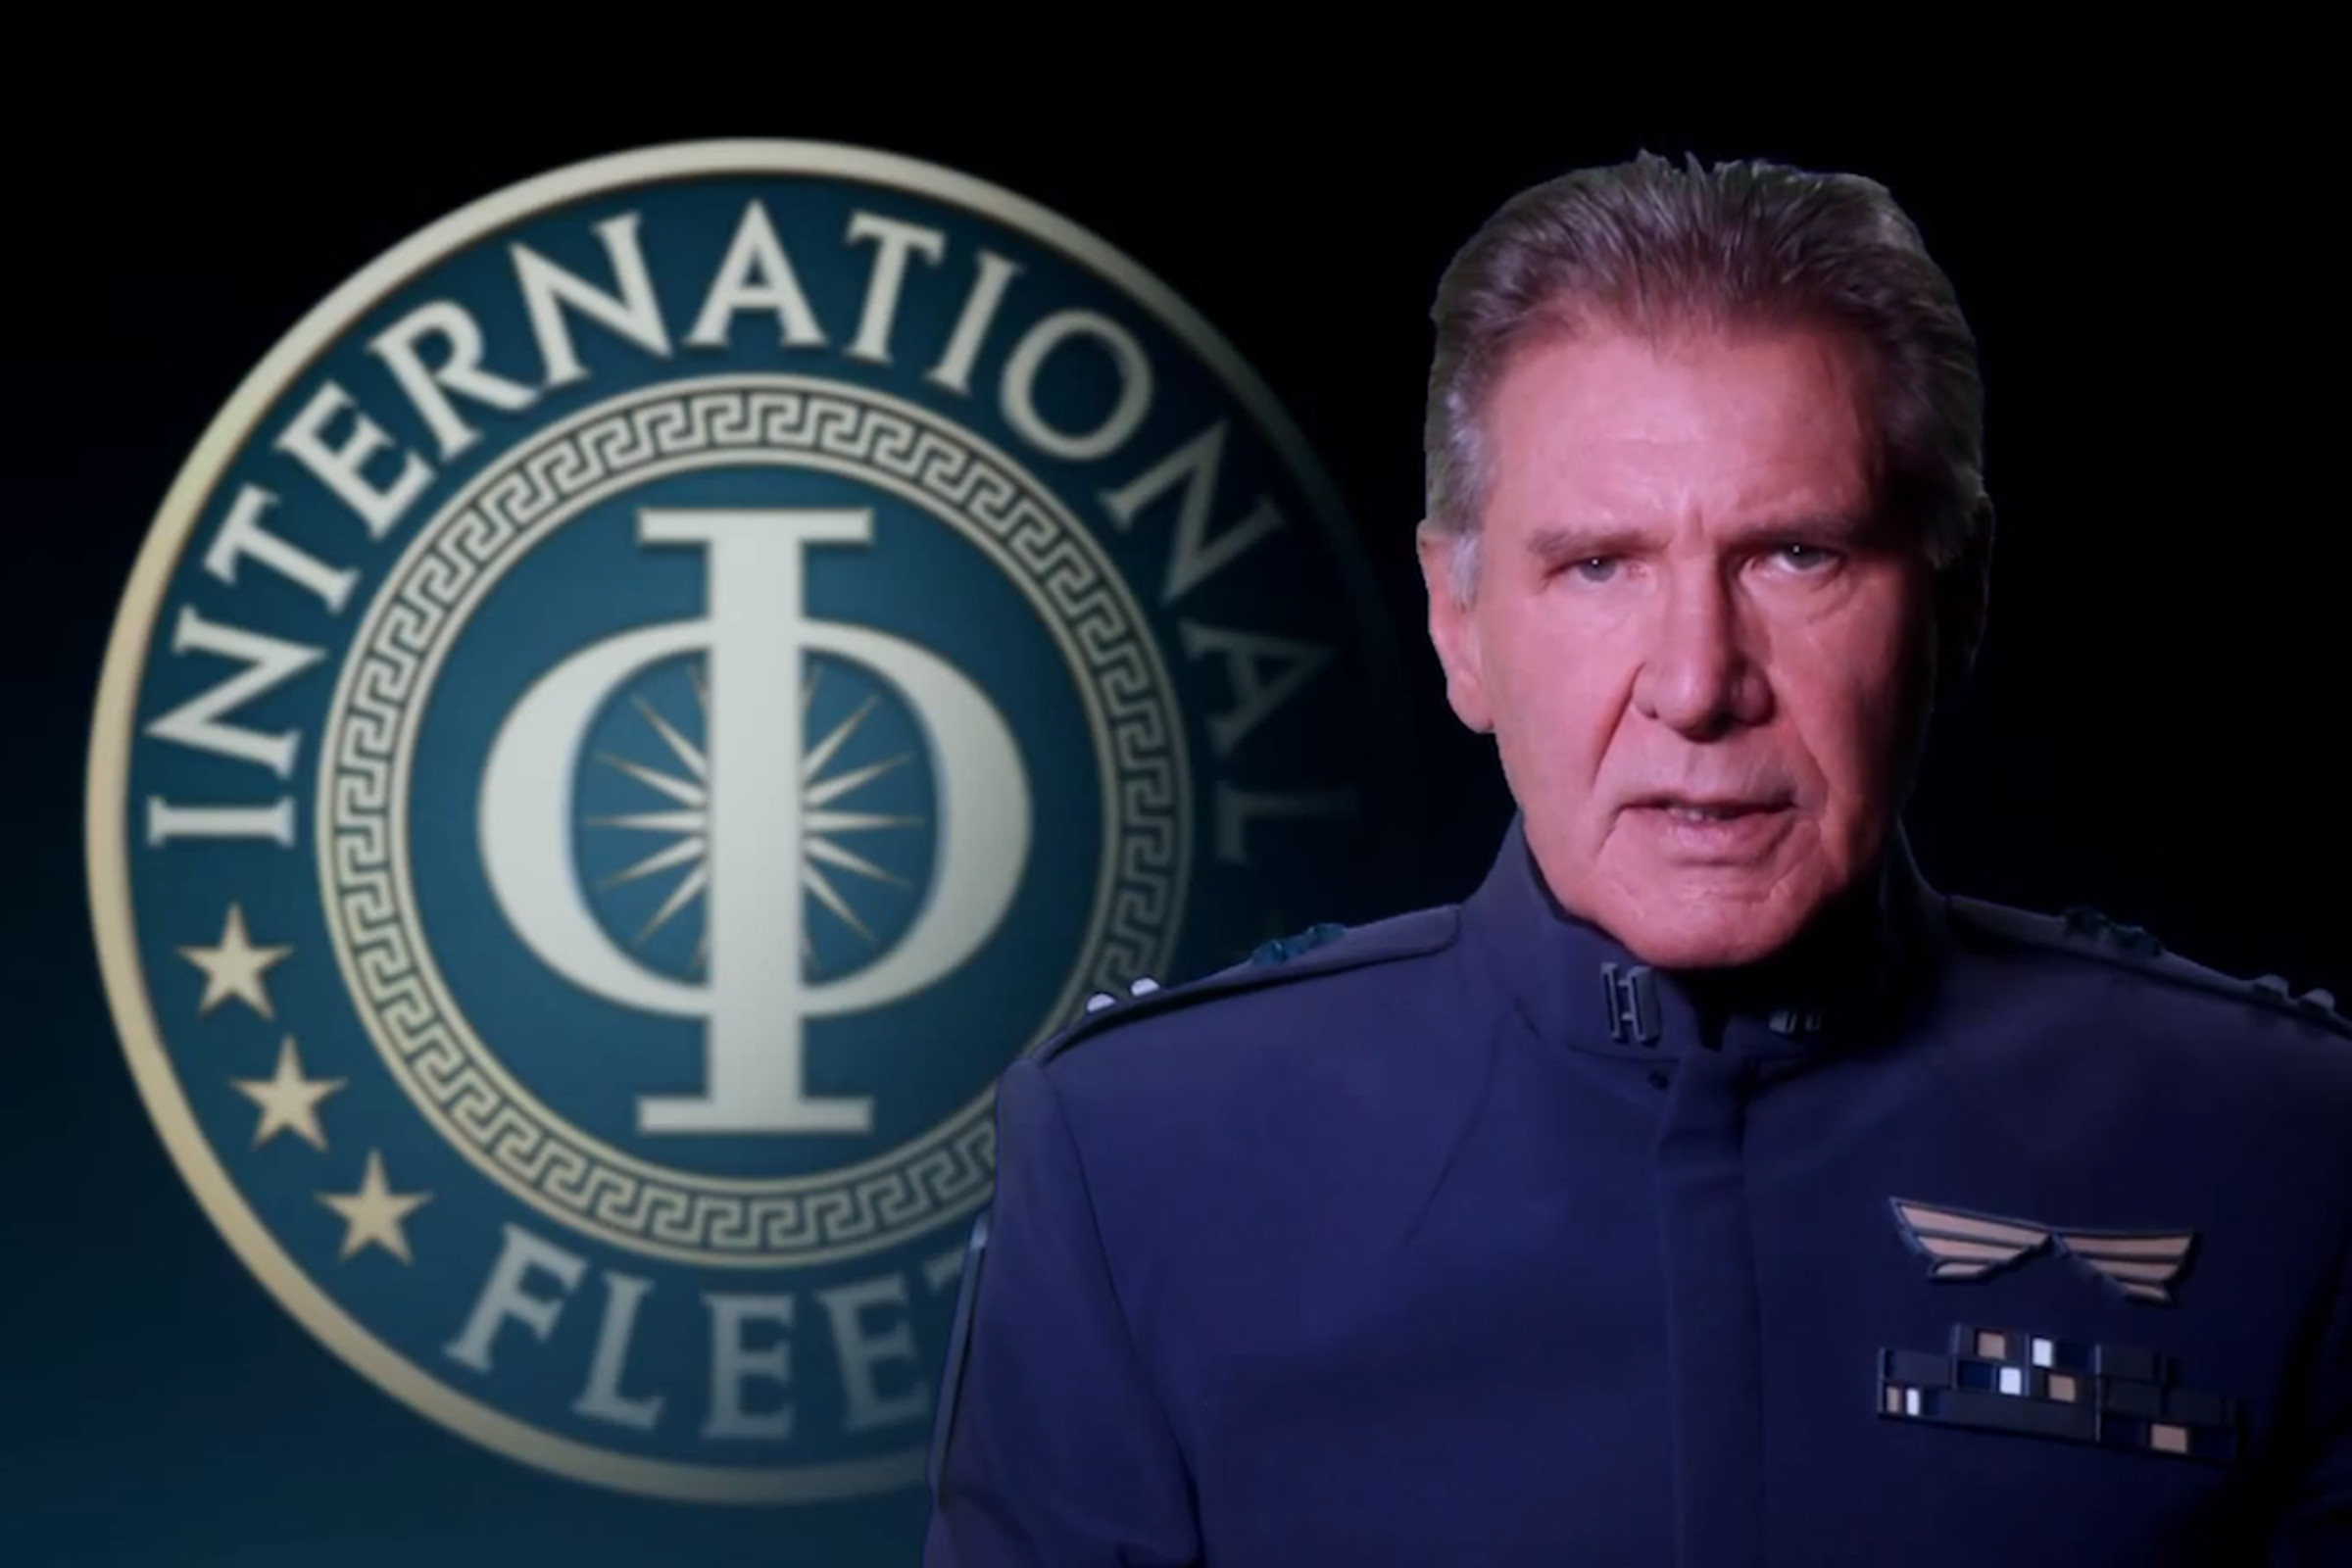 Harrison Ford as Col. Graff in Ender's Game (Credit: Summit Entertainment)